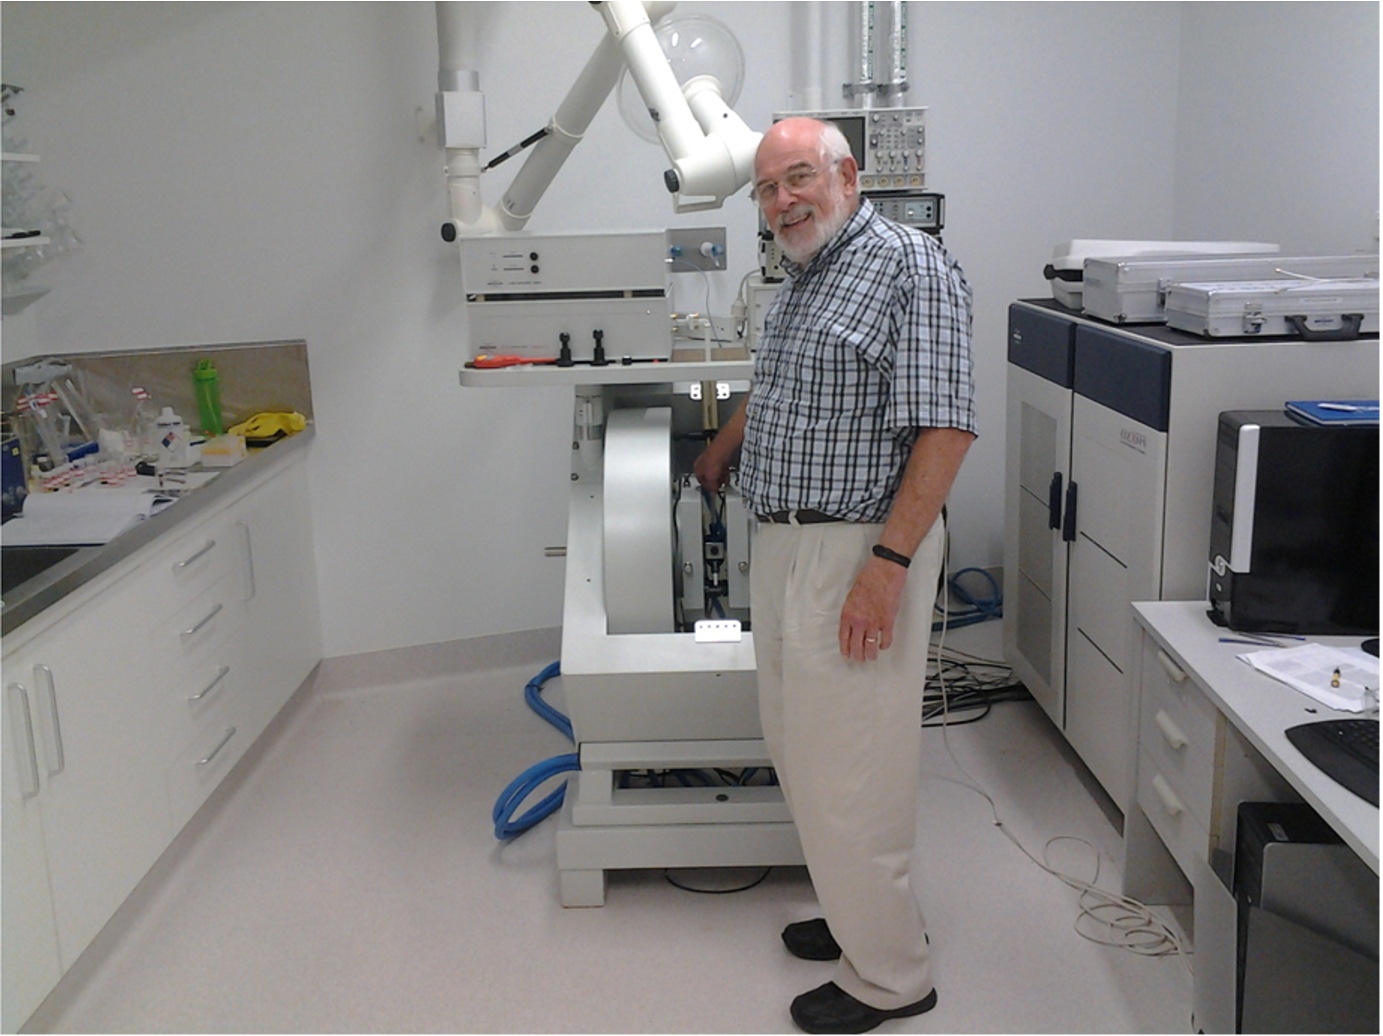 Lawrence Berliner standing next to an EPR spectrometer at the Centre for Advanced Imaging, University of Queensland (Australia) where he had collaboration with the late Prof. Graeme Hanson who passed away in February 2015. Photograph provided by Lawrence Berliner.